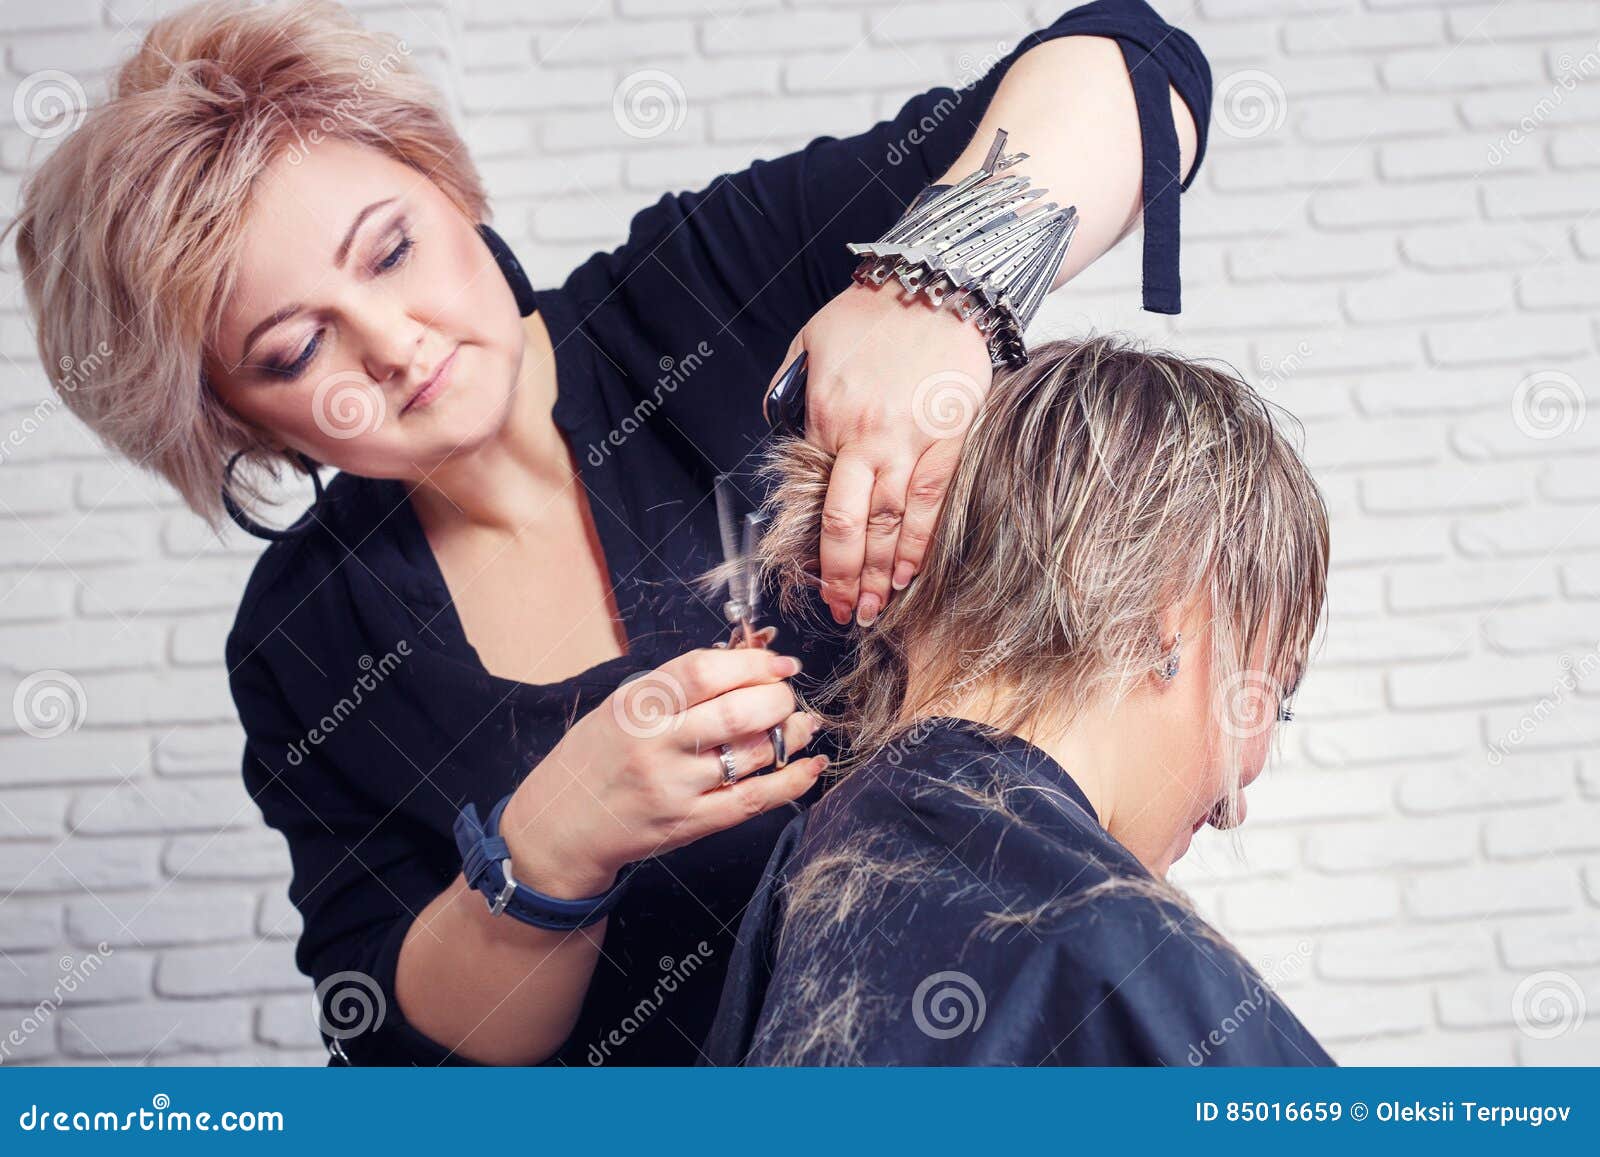 Process of hair cutting stock image. Image of fashion - 85016659